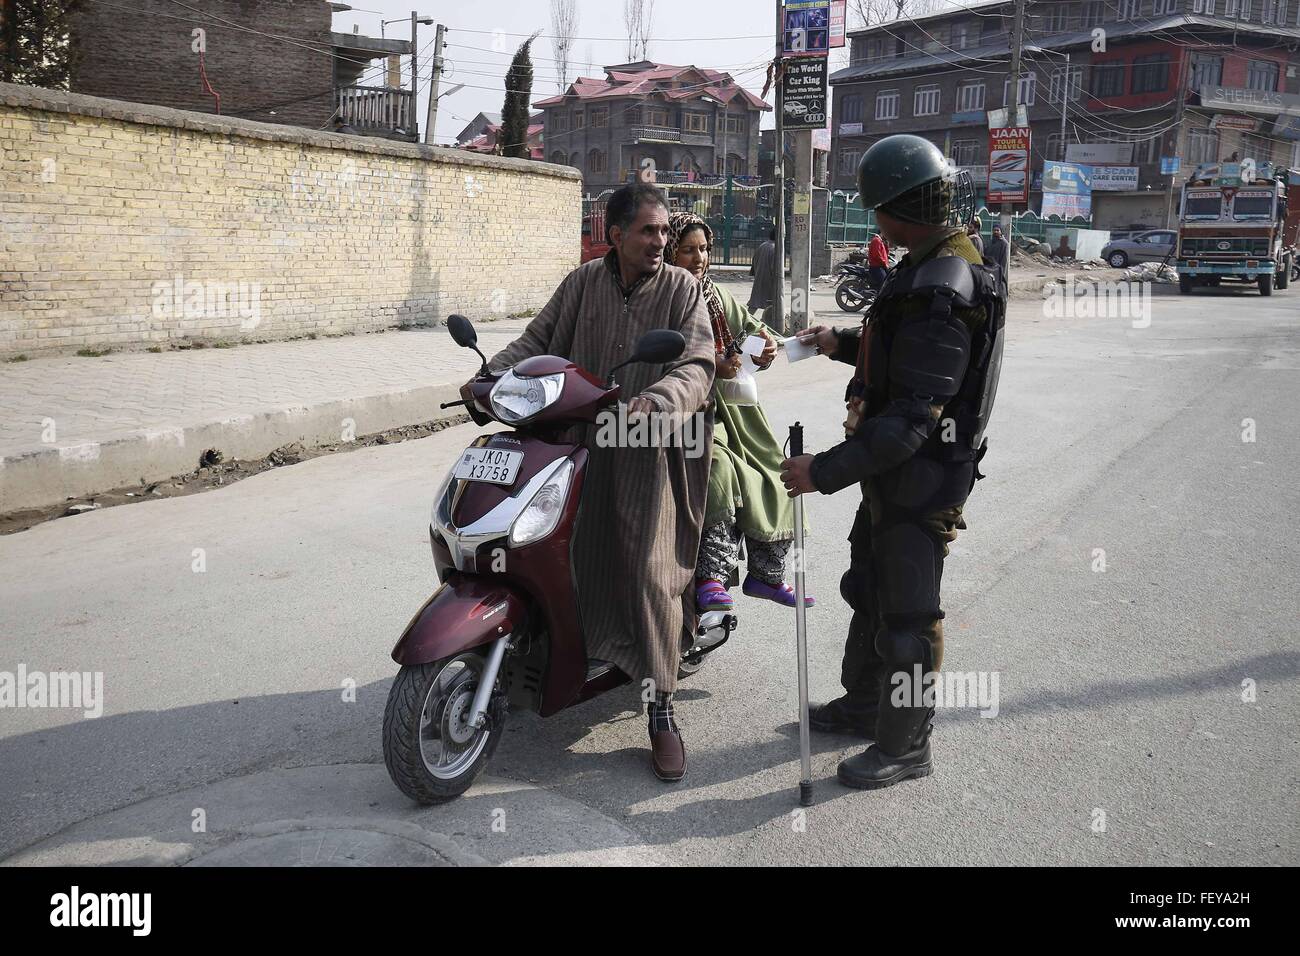 Srinagar, Indian-controlled Kashmir. 9th Feb, 2016. An Indian paramilitary trooper stops a couple on the scooter in Srinagar, summer capital of Indian-controlled Kashmir, Feb. 9, 2016. Curfew-like restrictions have been imposed in several areas of Srinagar city to prevent protests and clashes on the third death anniversary of Indian parliament-attack convict Mohammed Afzal Guru, officials said Tuesday. © Stringer/Xinhua/Alamy Live News Stock Photo